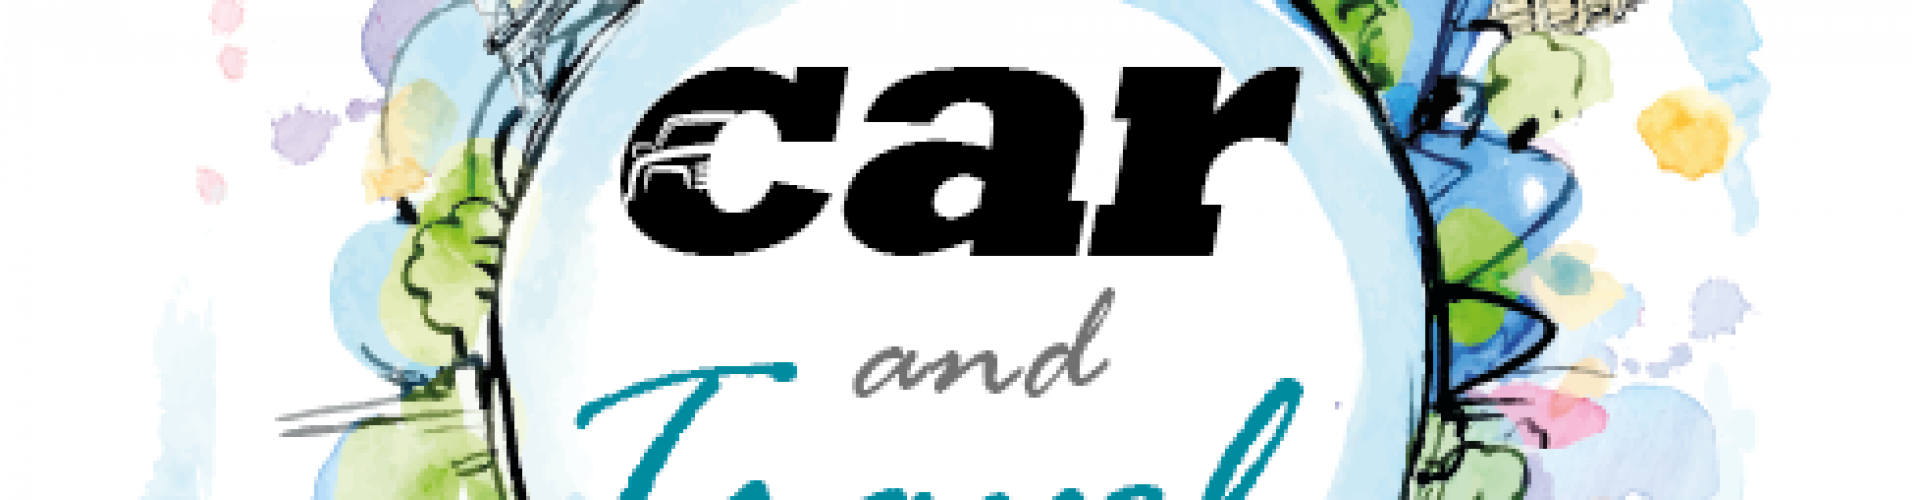 NEW-CAR-AND-TRAVEL-LOGO